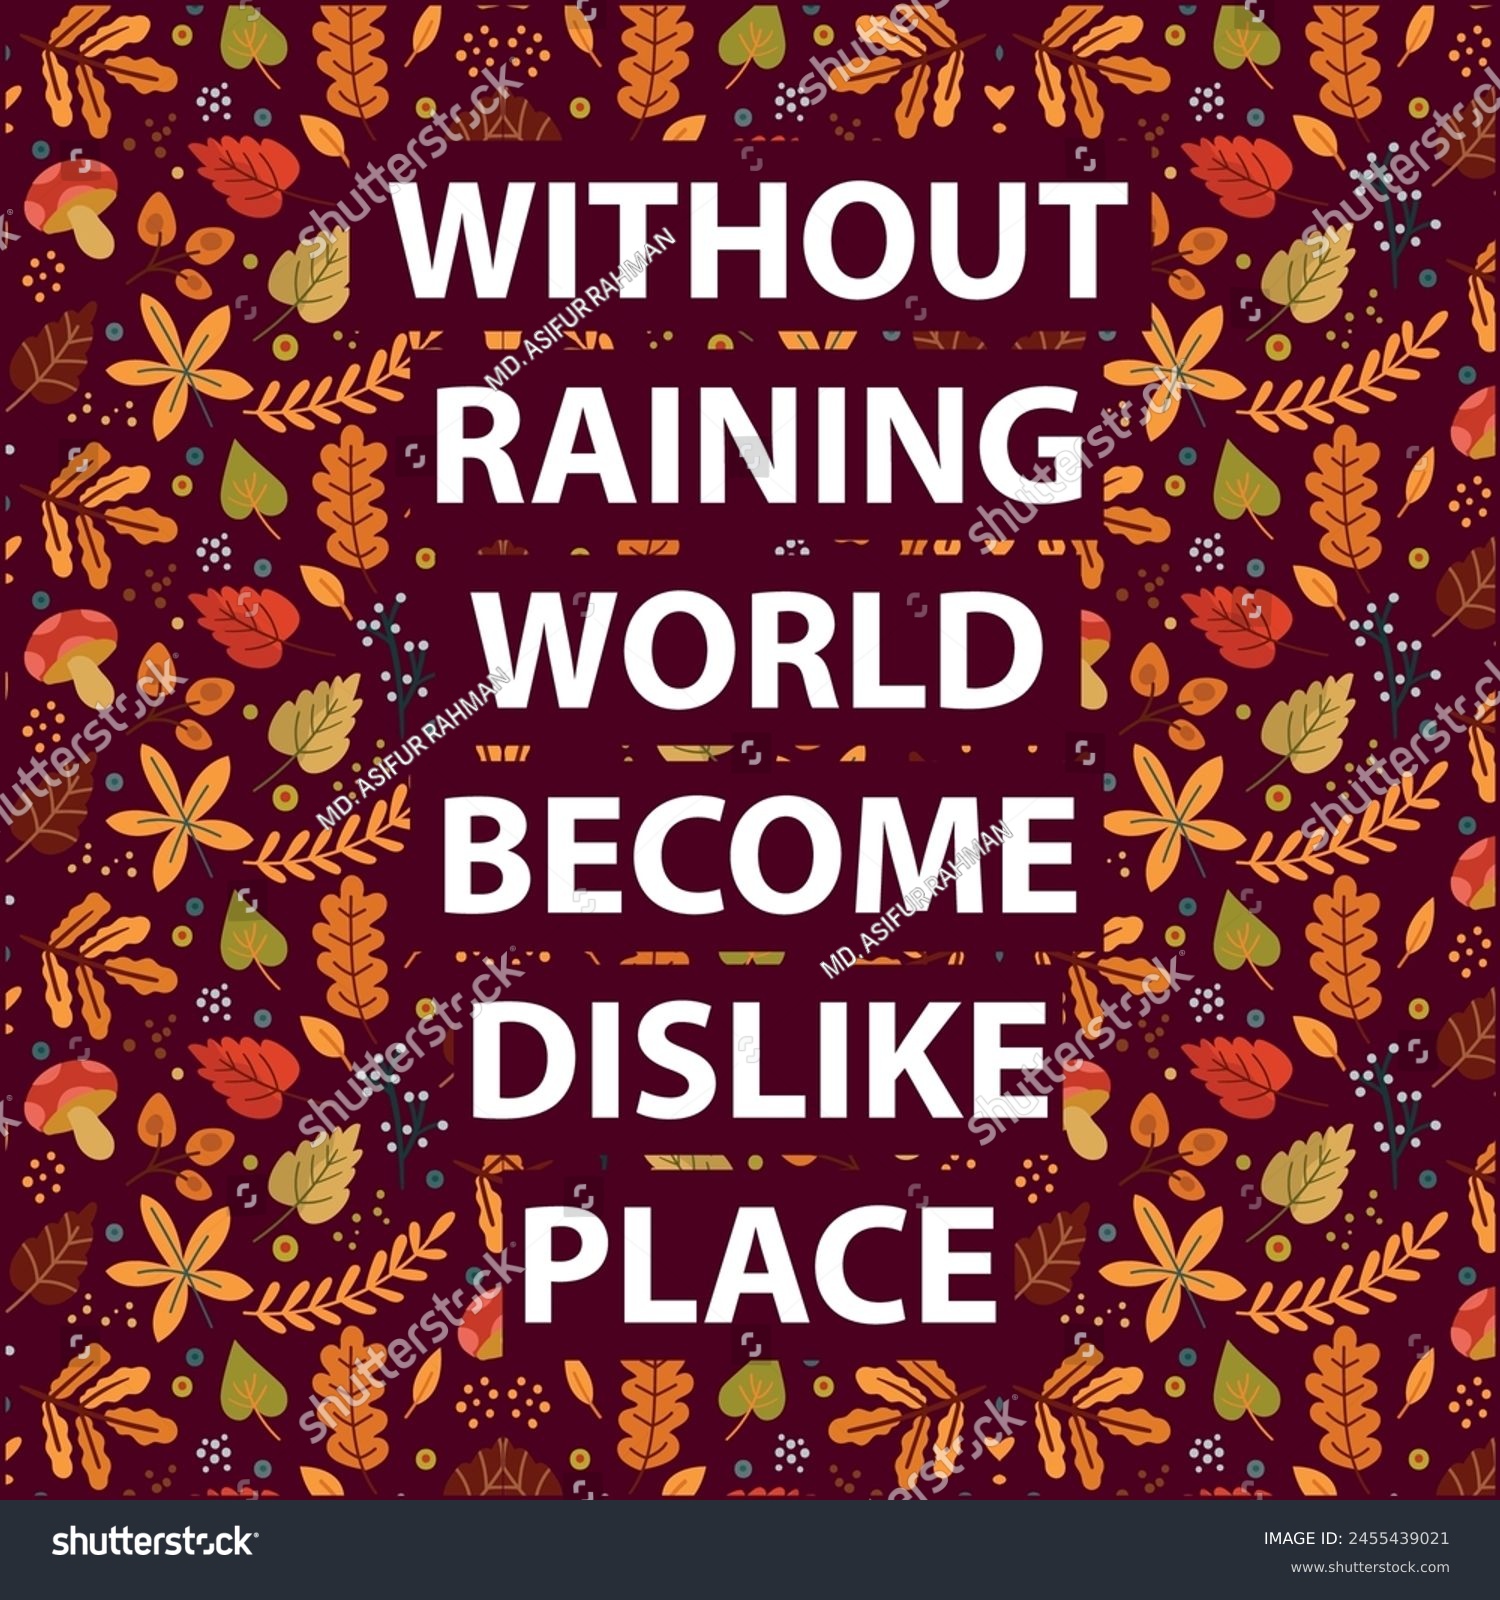 SVG of without raining world become dislike place svg